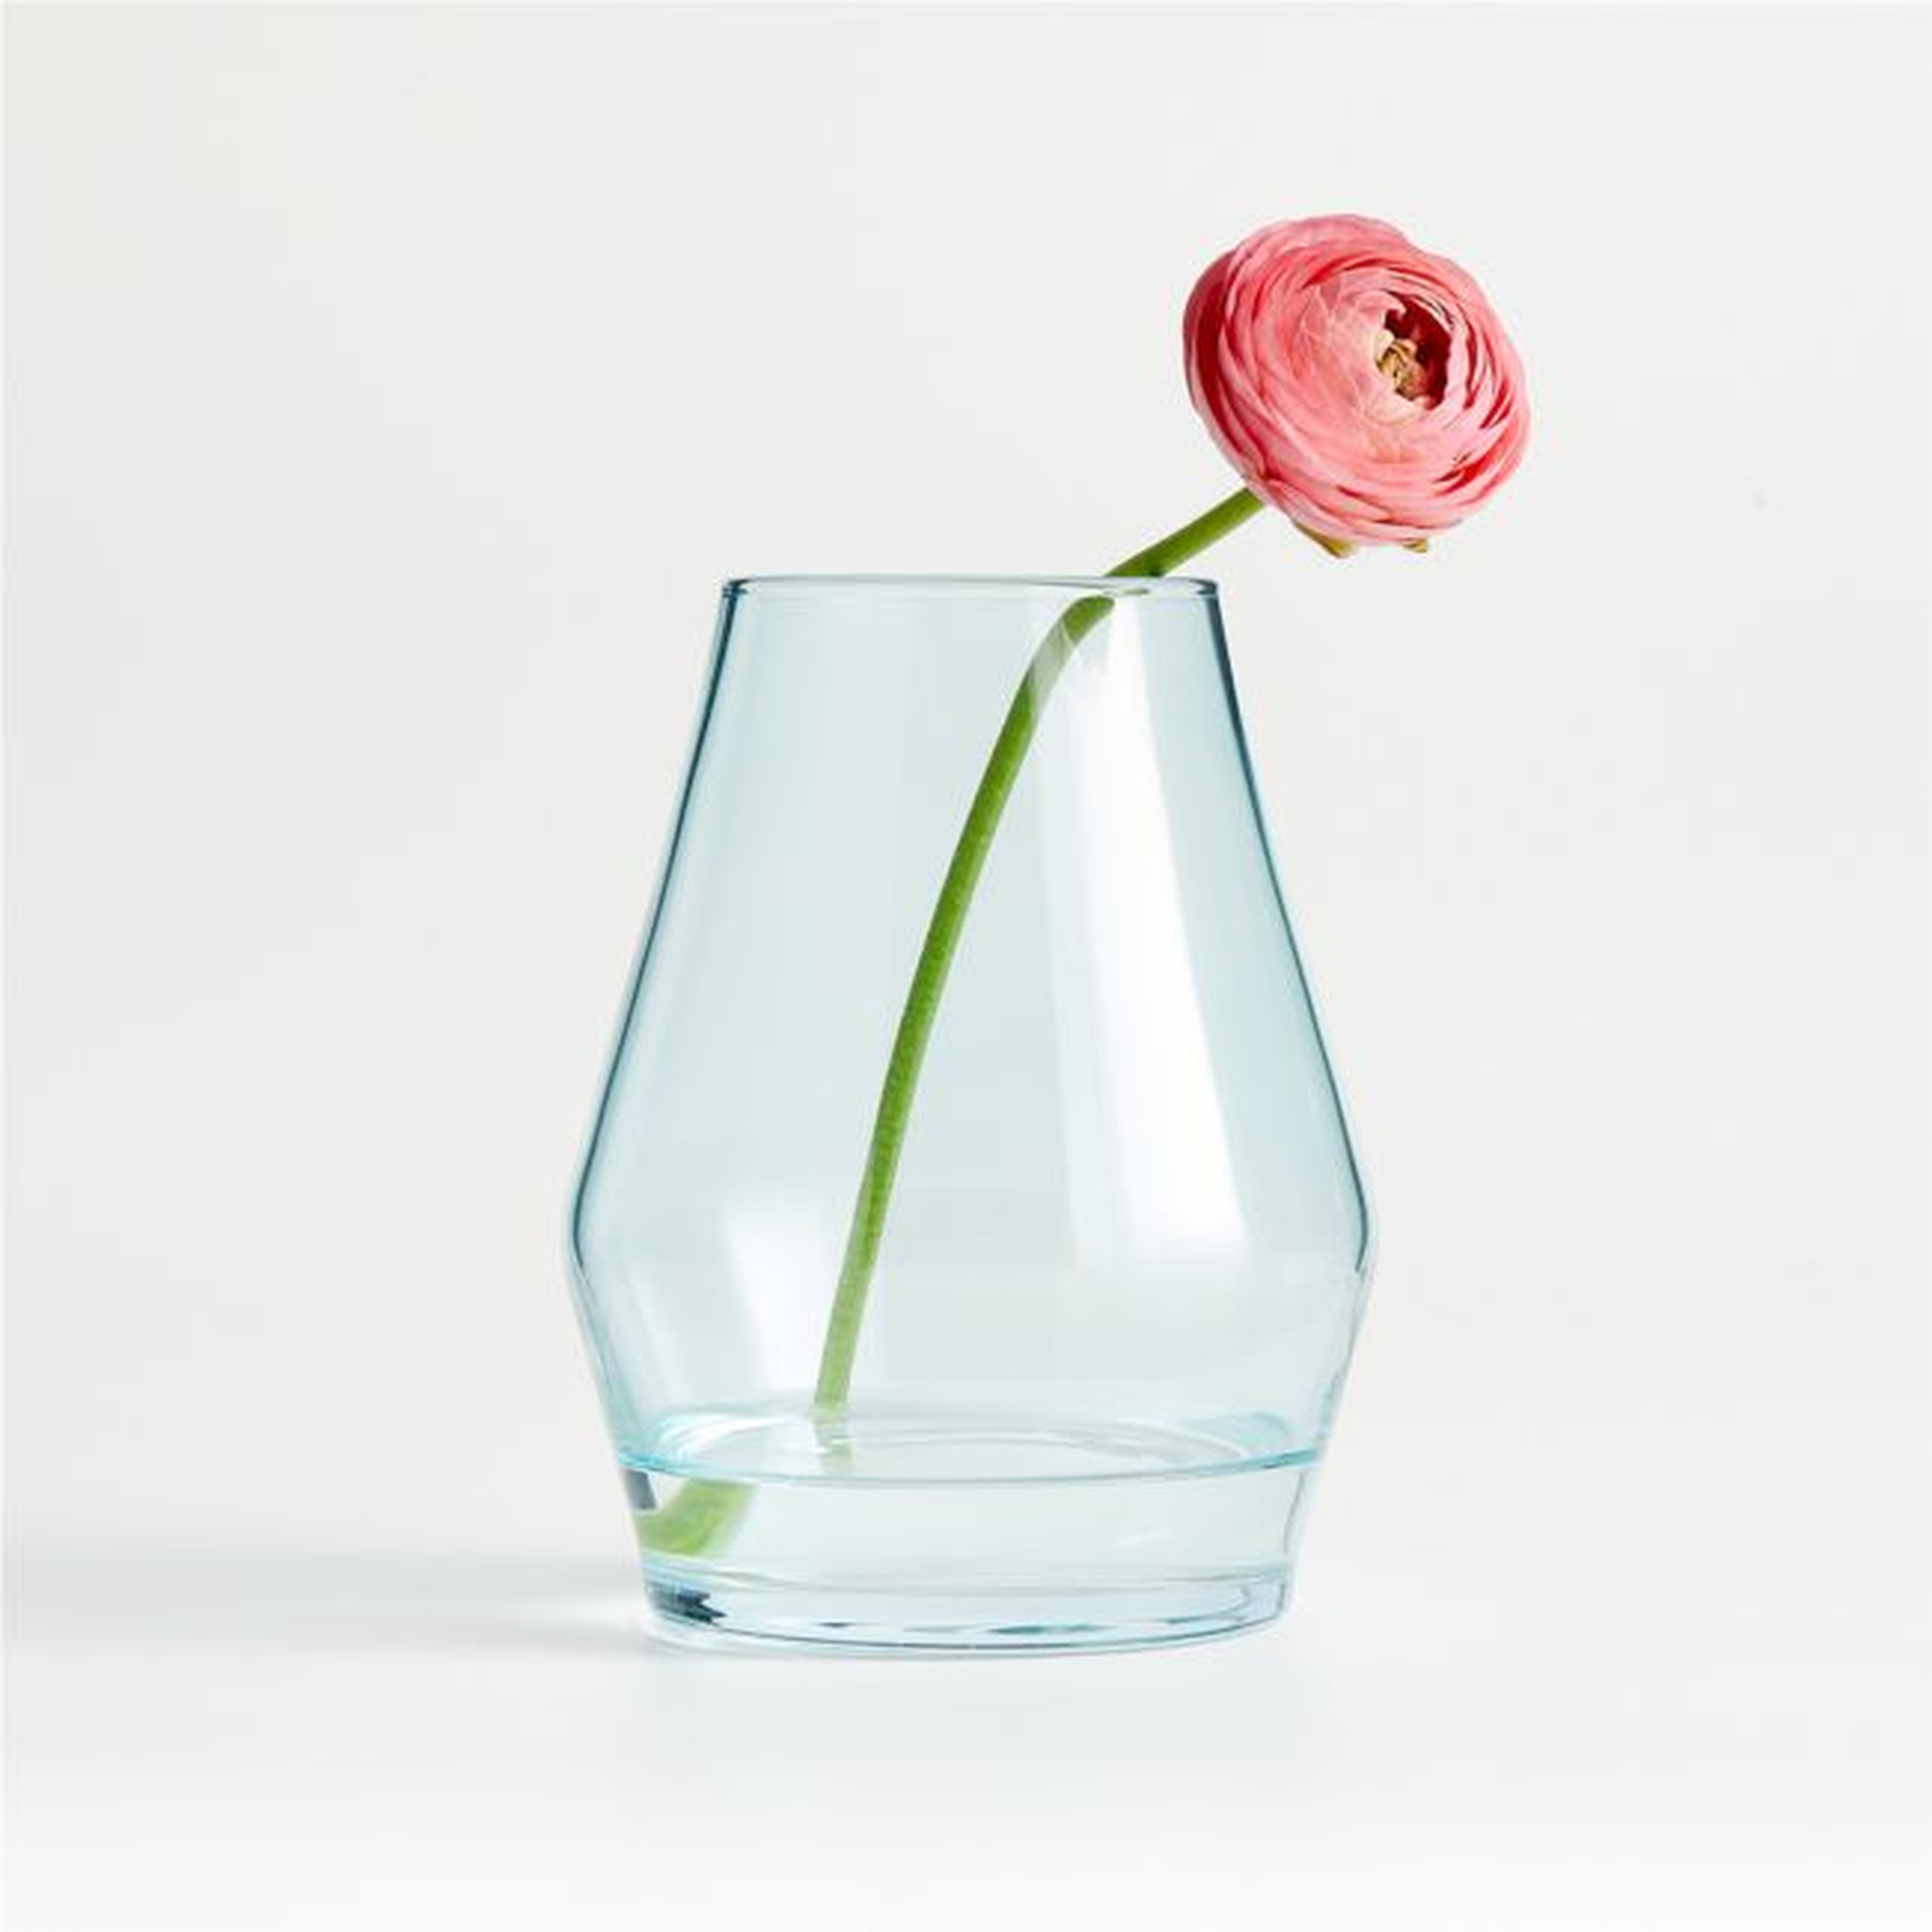 Laurel Small Angled Blue Glass Vase - Crate and Barrel